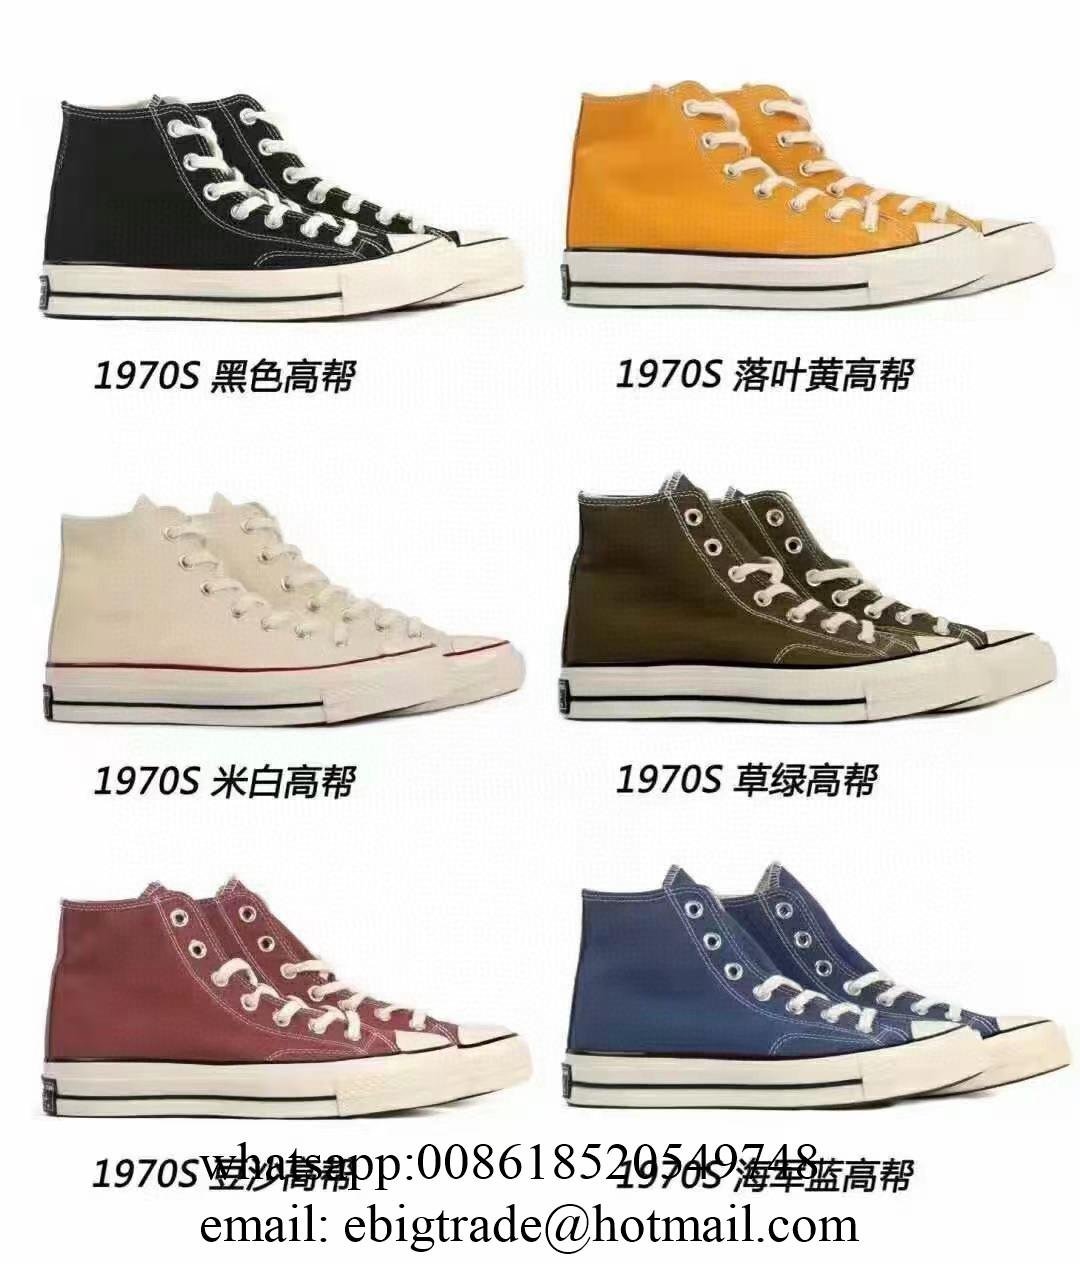 Cheap Converse shoes men Converse All Star whoelsale Converse shoes Price ( China Trading Company) - Athletic & Sports Shoes - Shoes Products